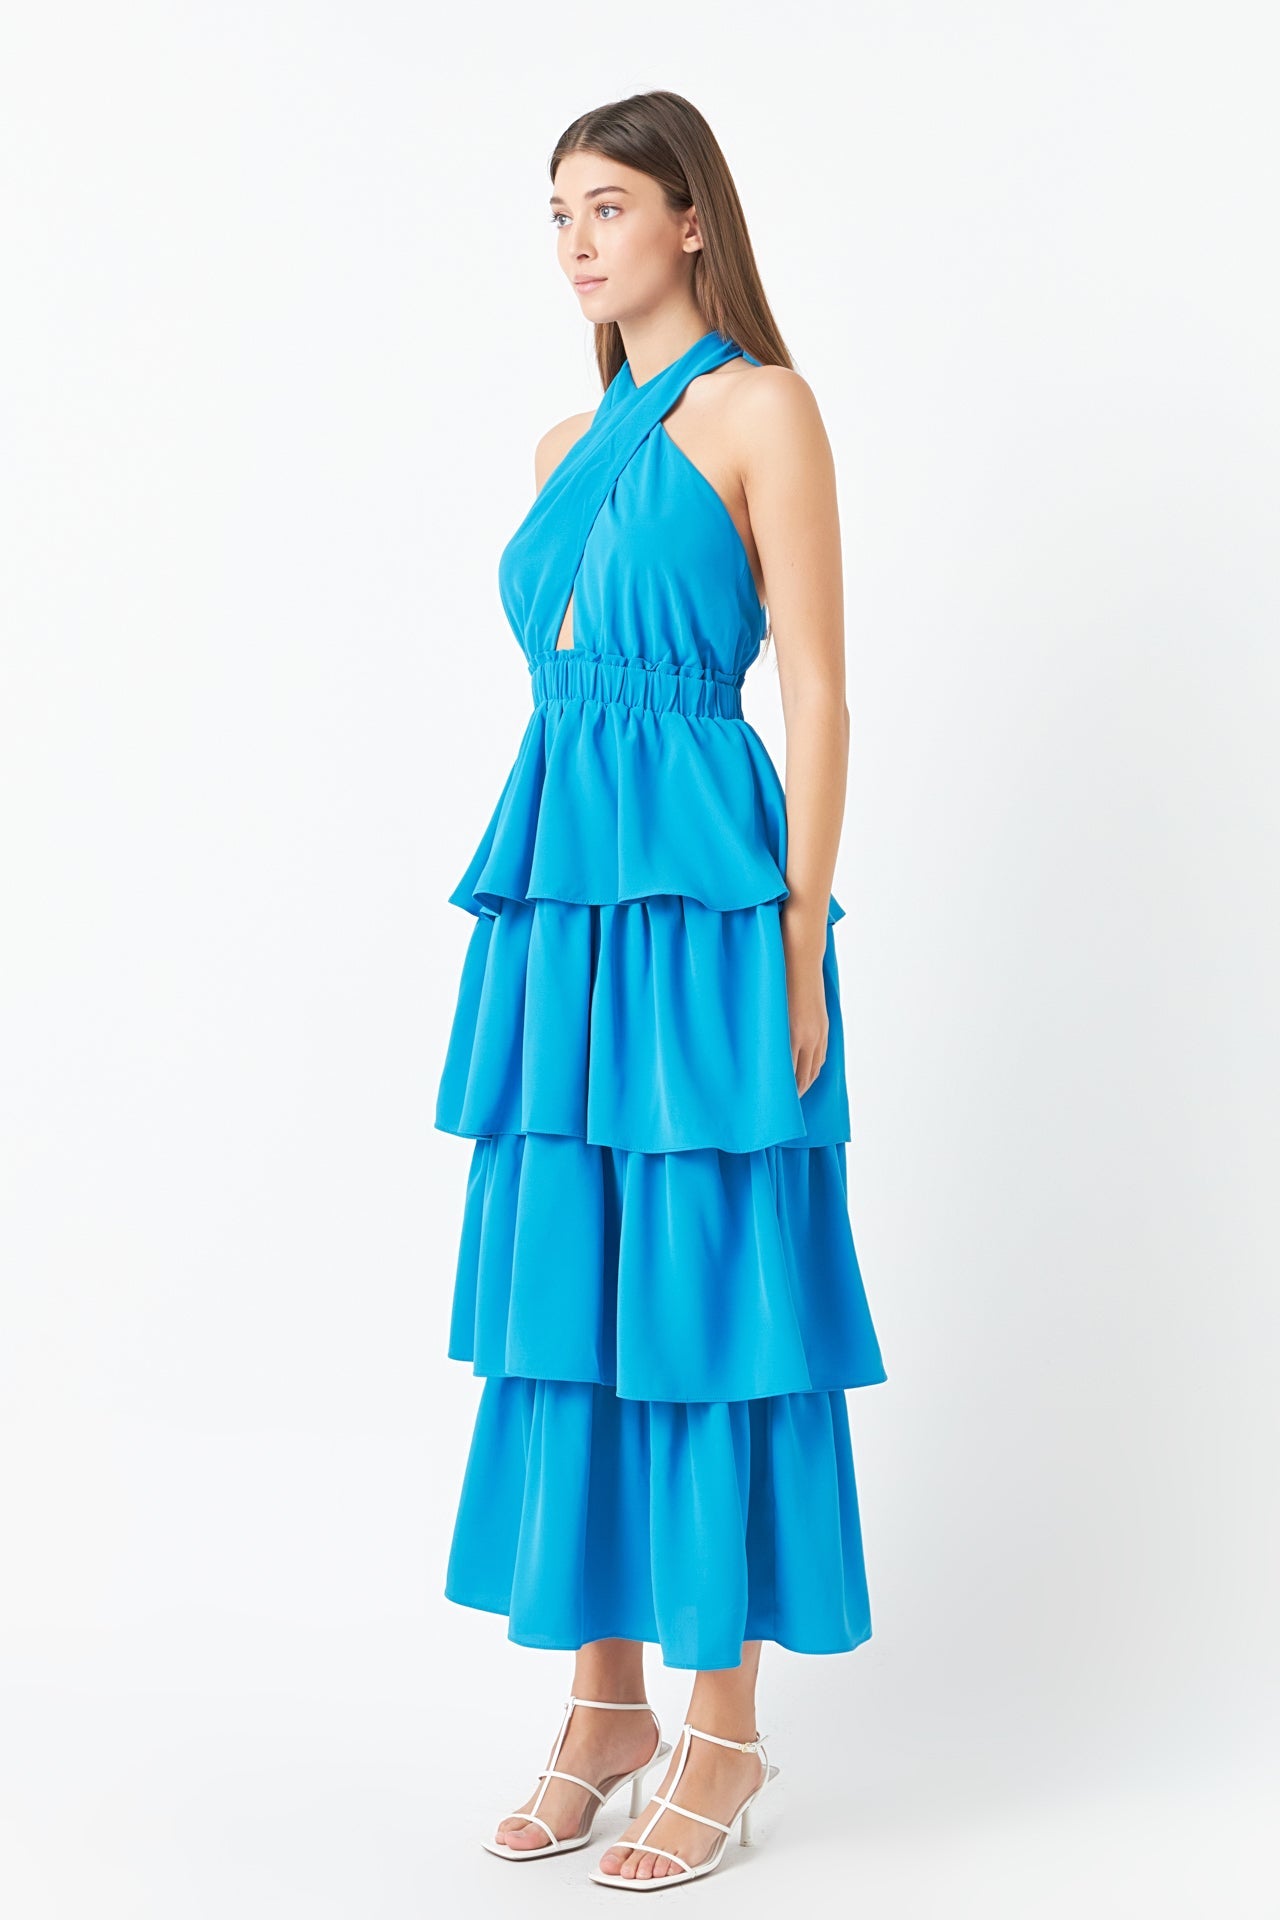 ENDLESS ROSE - Cross Halter Neck Tiered Maxi Dress - DRESSES available at Objectrare